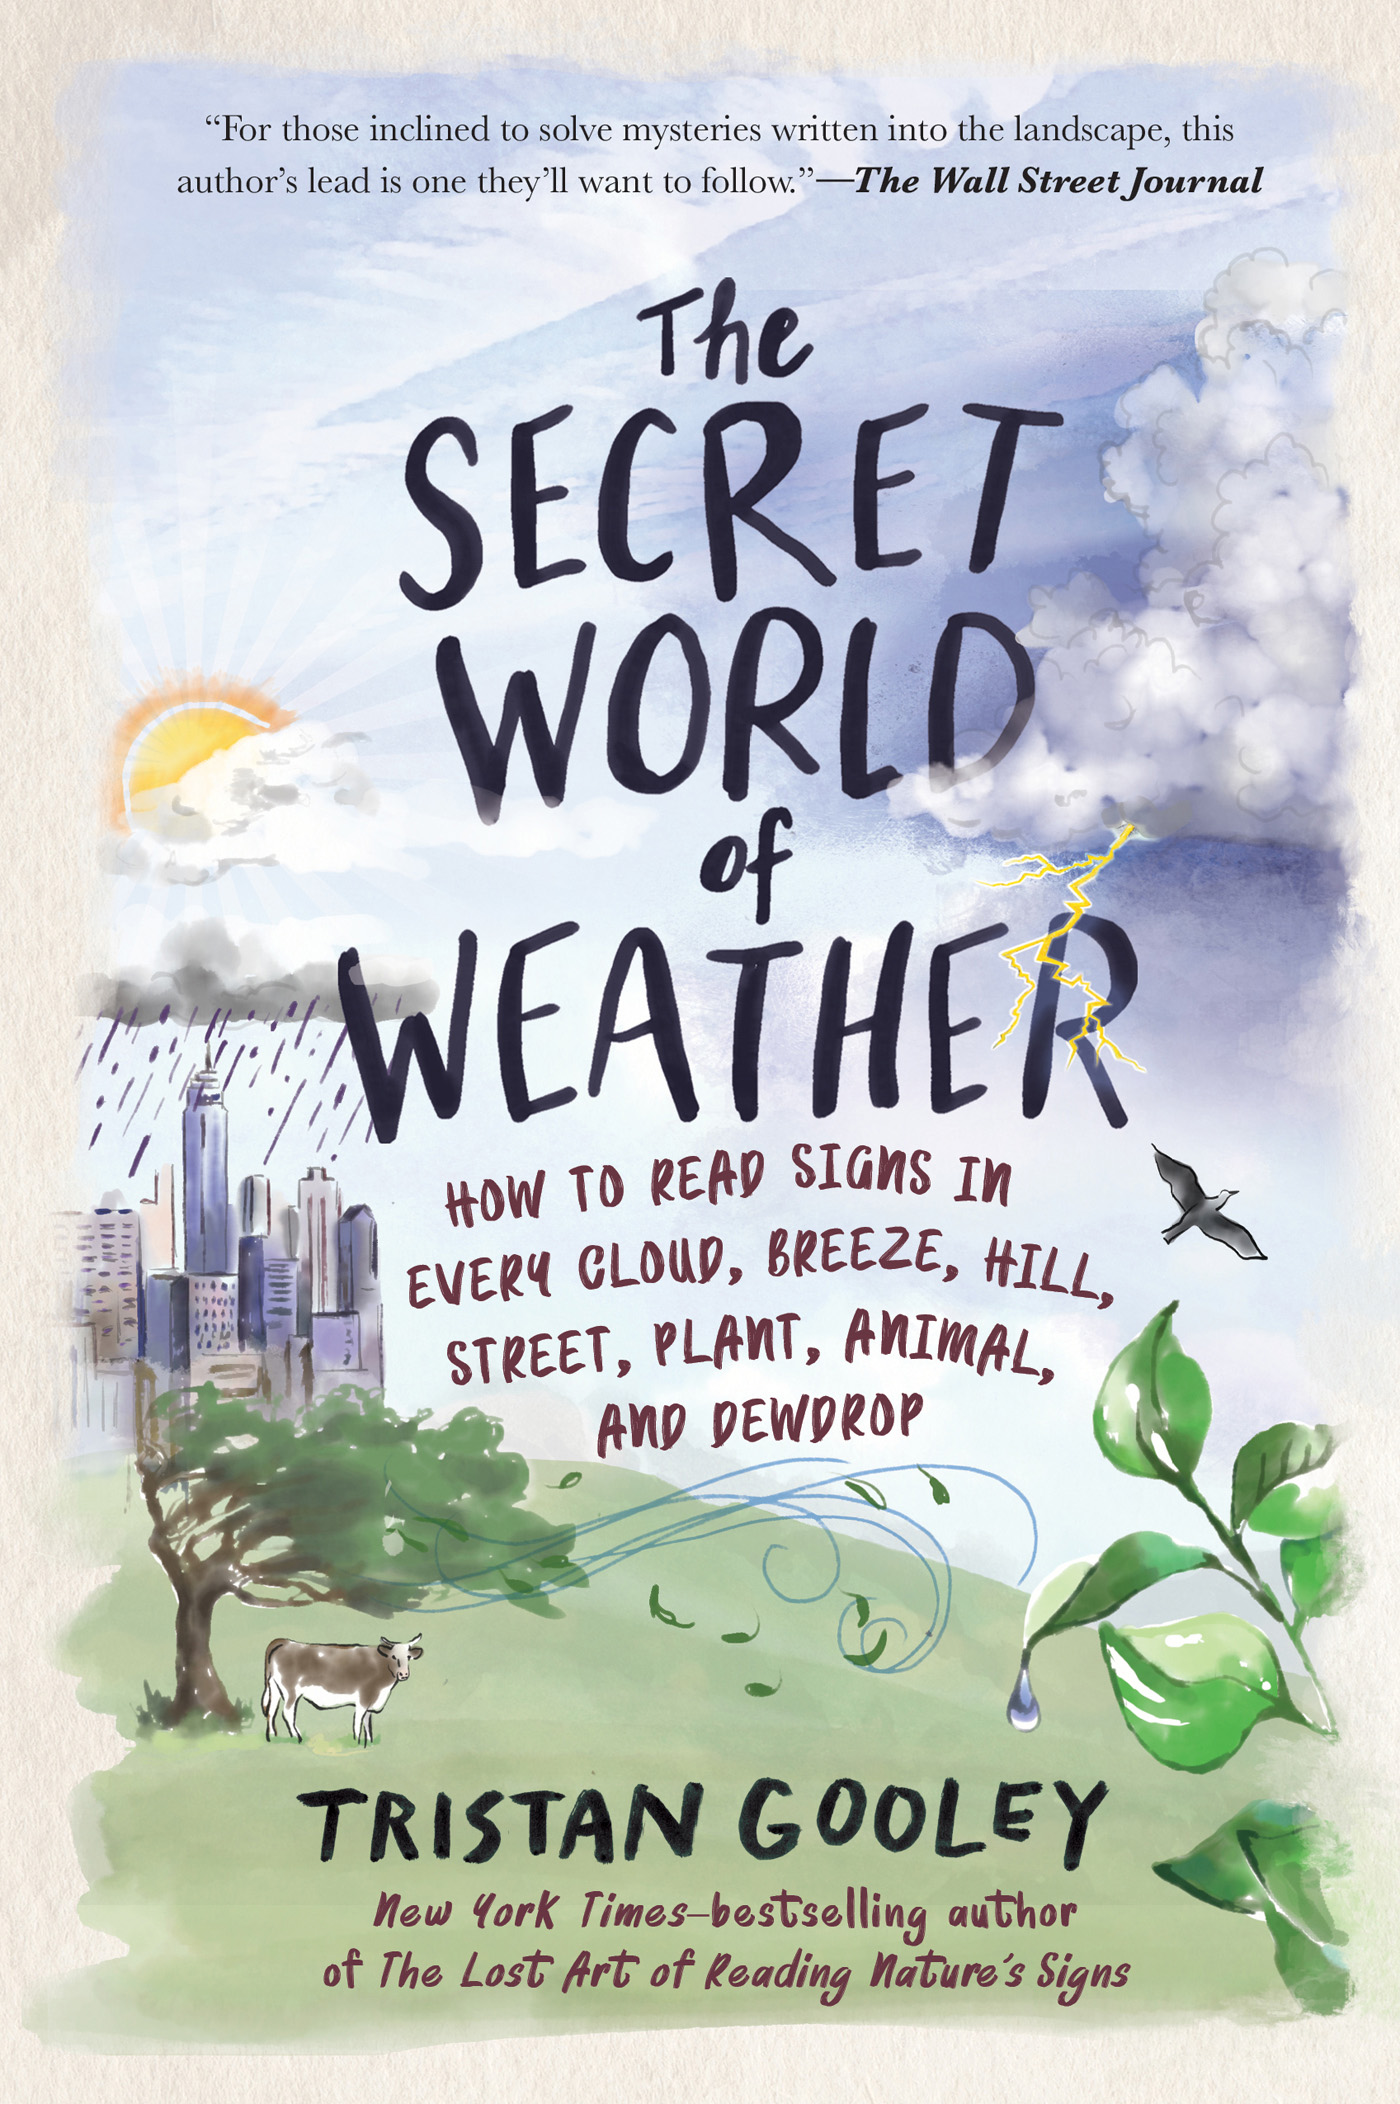 The Secret World of Weather: 'Makes You Look at Your Environment in a Different, More Poetic Way'